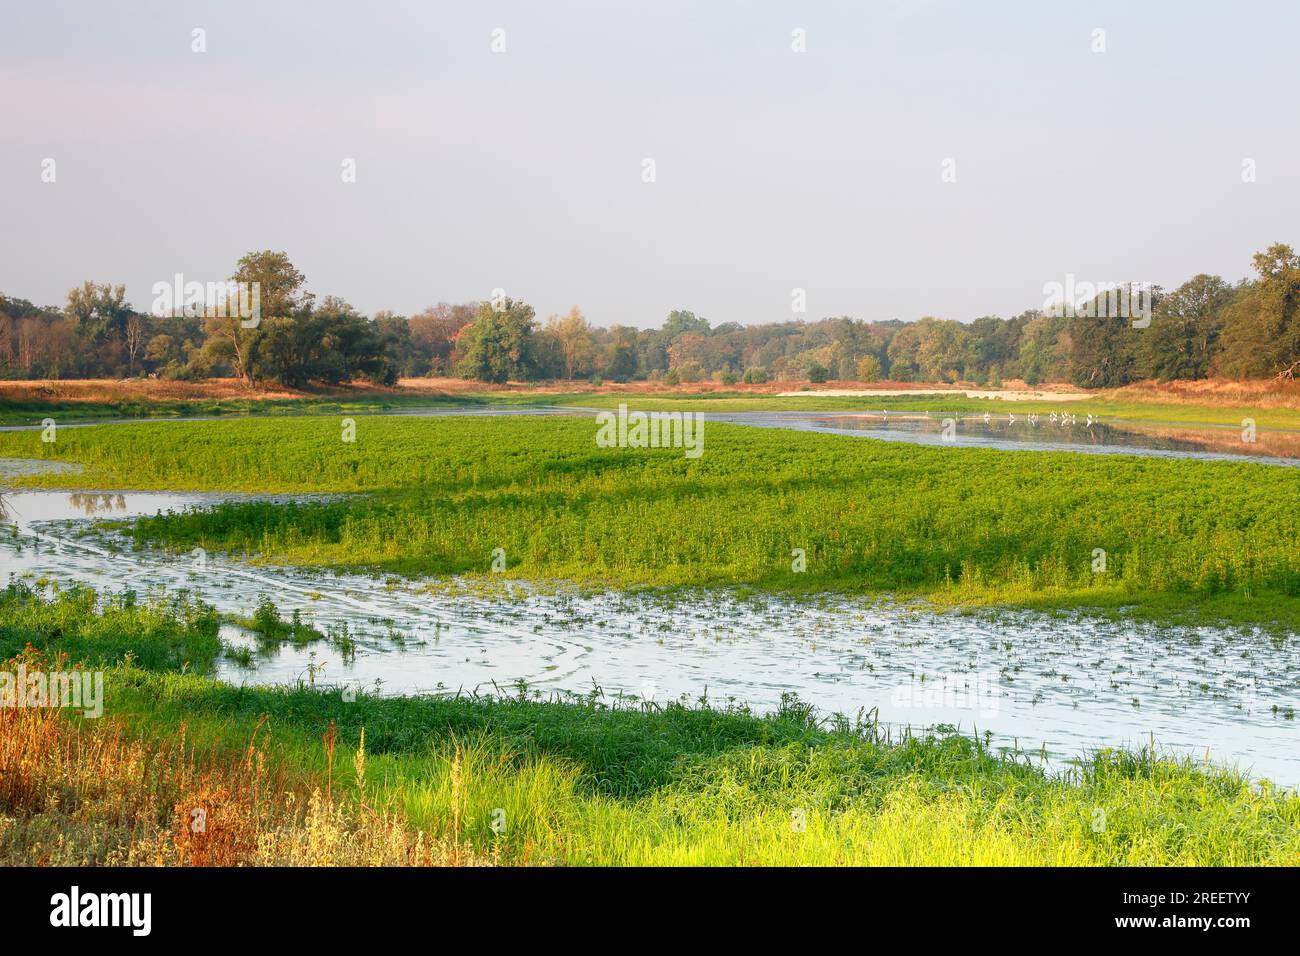 Typical biotopes of the river landscape, fertile mudflats due to low water levels, Middle Elbe Biosphere Reserve, Saxony-Anhalt, Germany Stock Photo